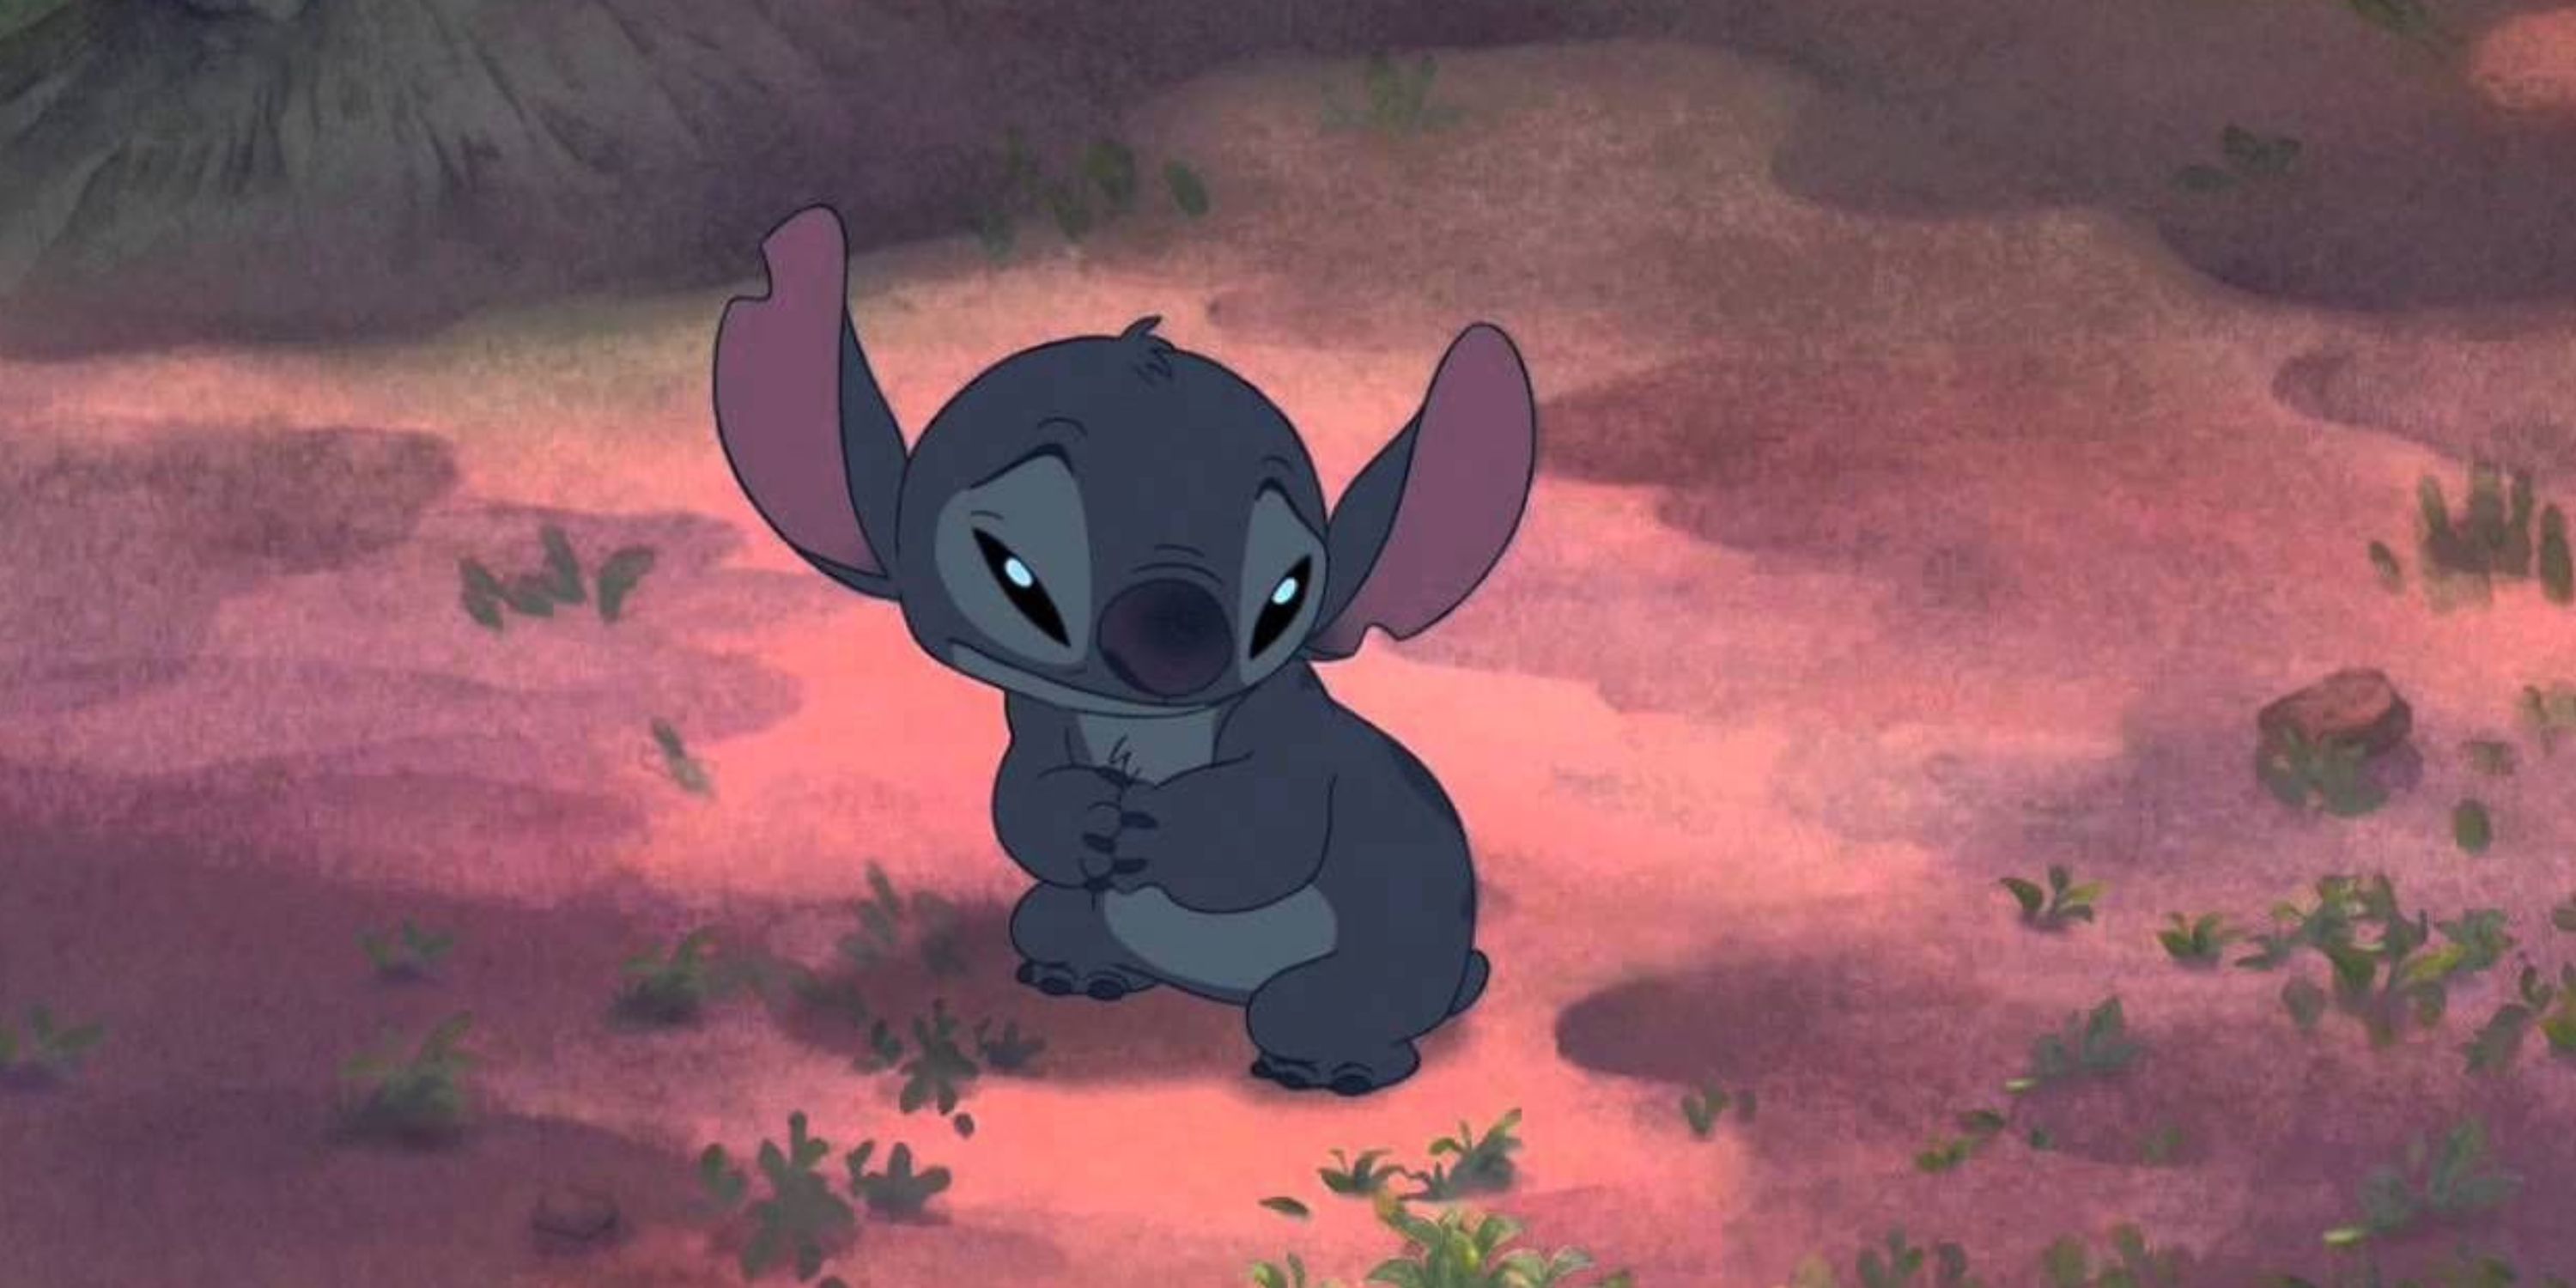 Stitch looking sad in the forest in Lilo and Stitch (2002)